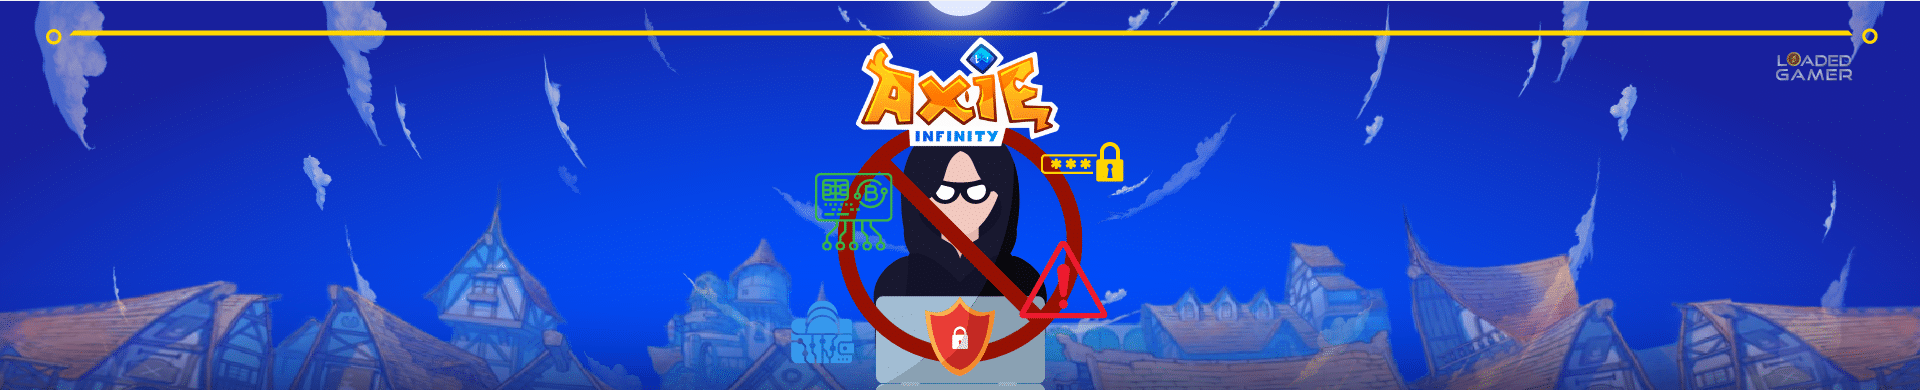 How to Avoid Getting Hacked in Axie Infinity (1)